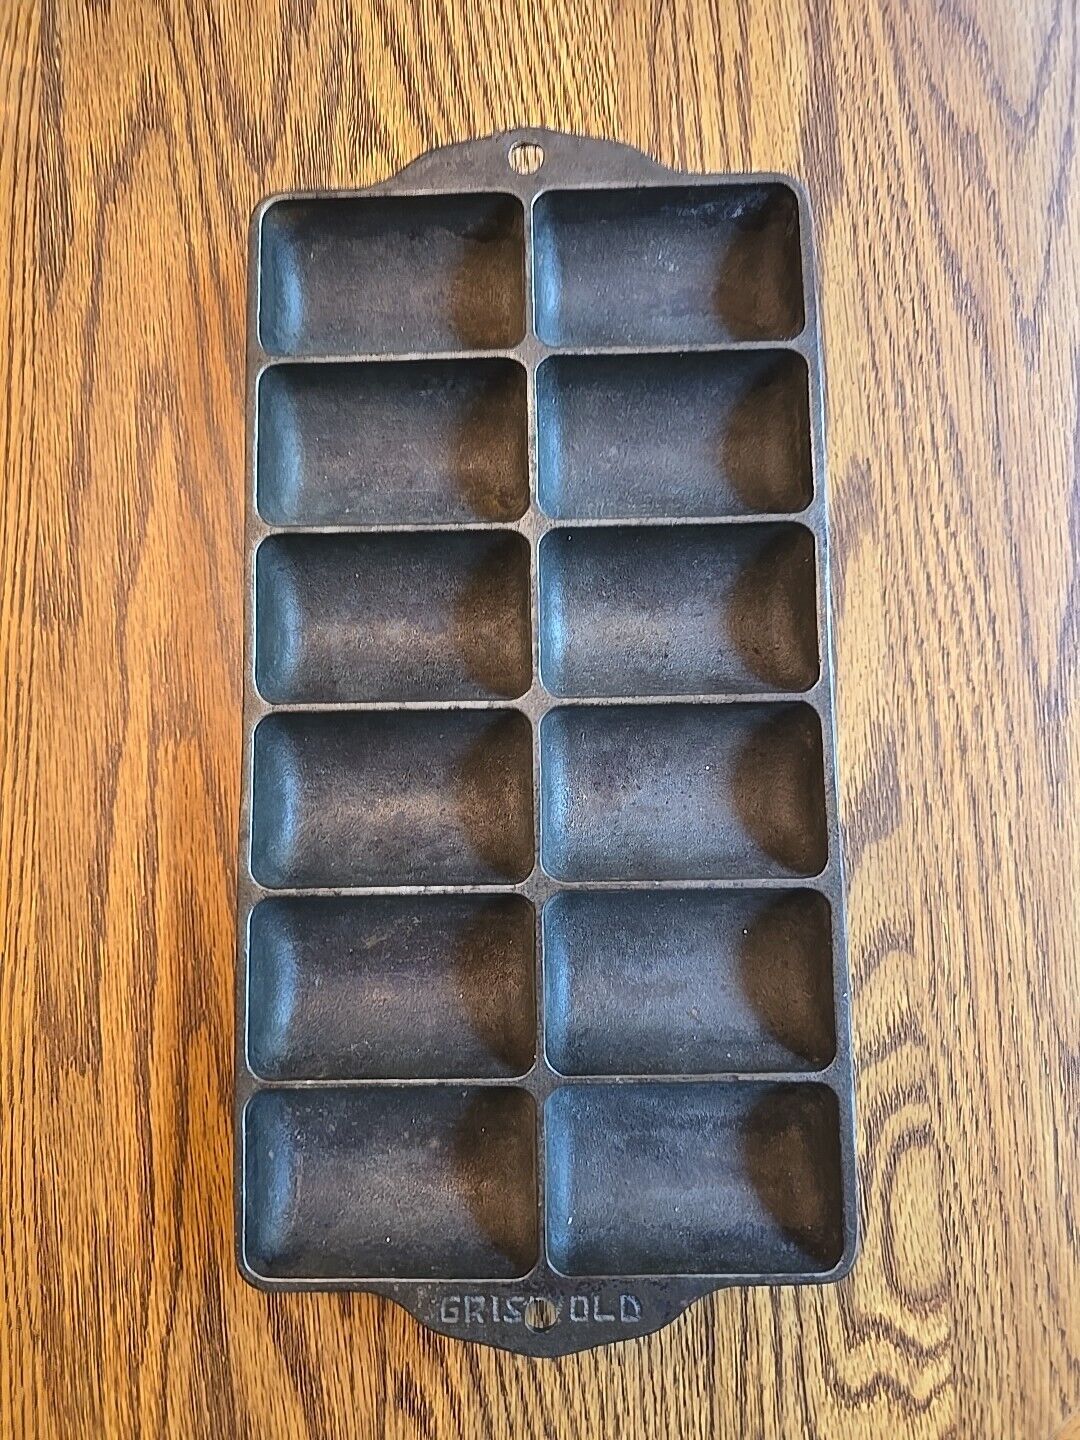 Griswold Cast Iron #11 Slant Logo French Roll Pan